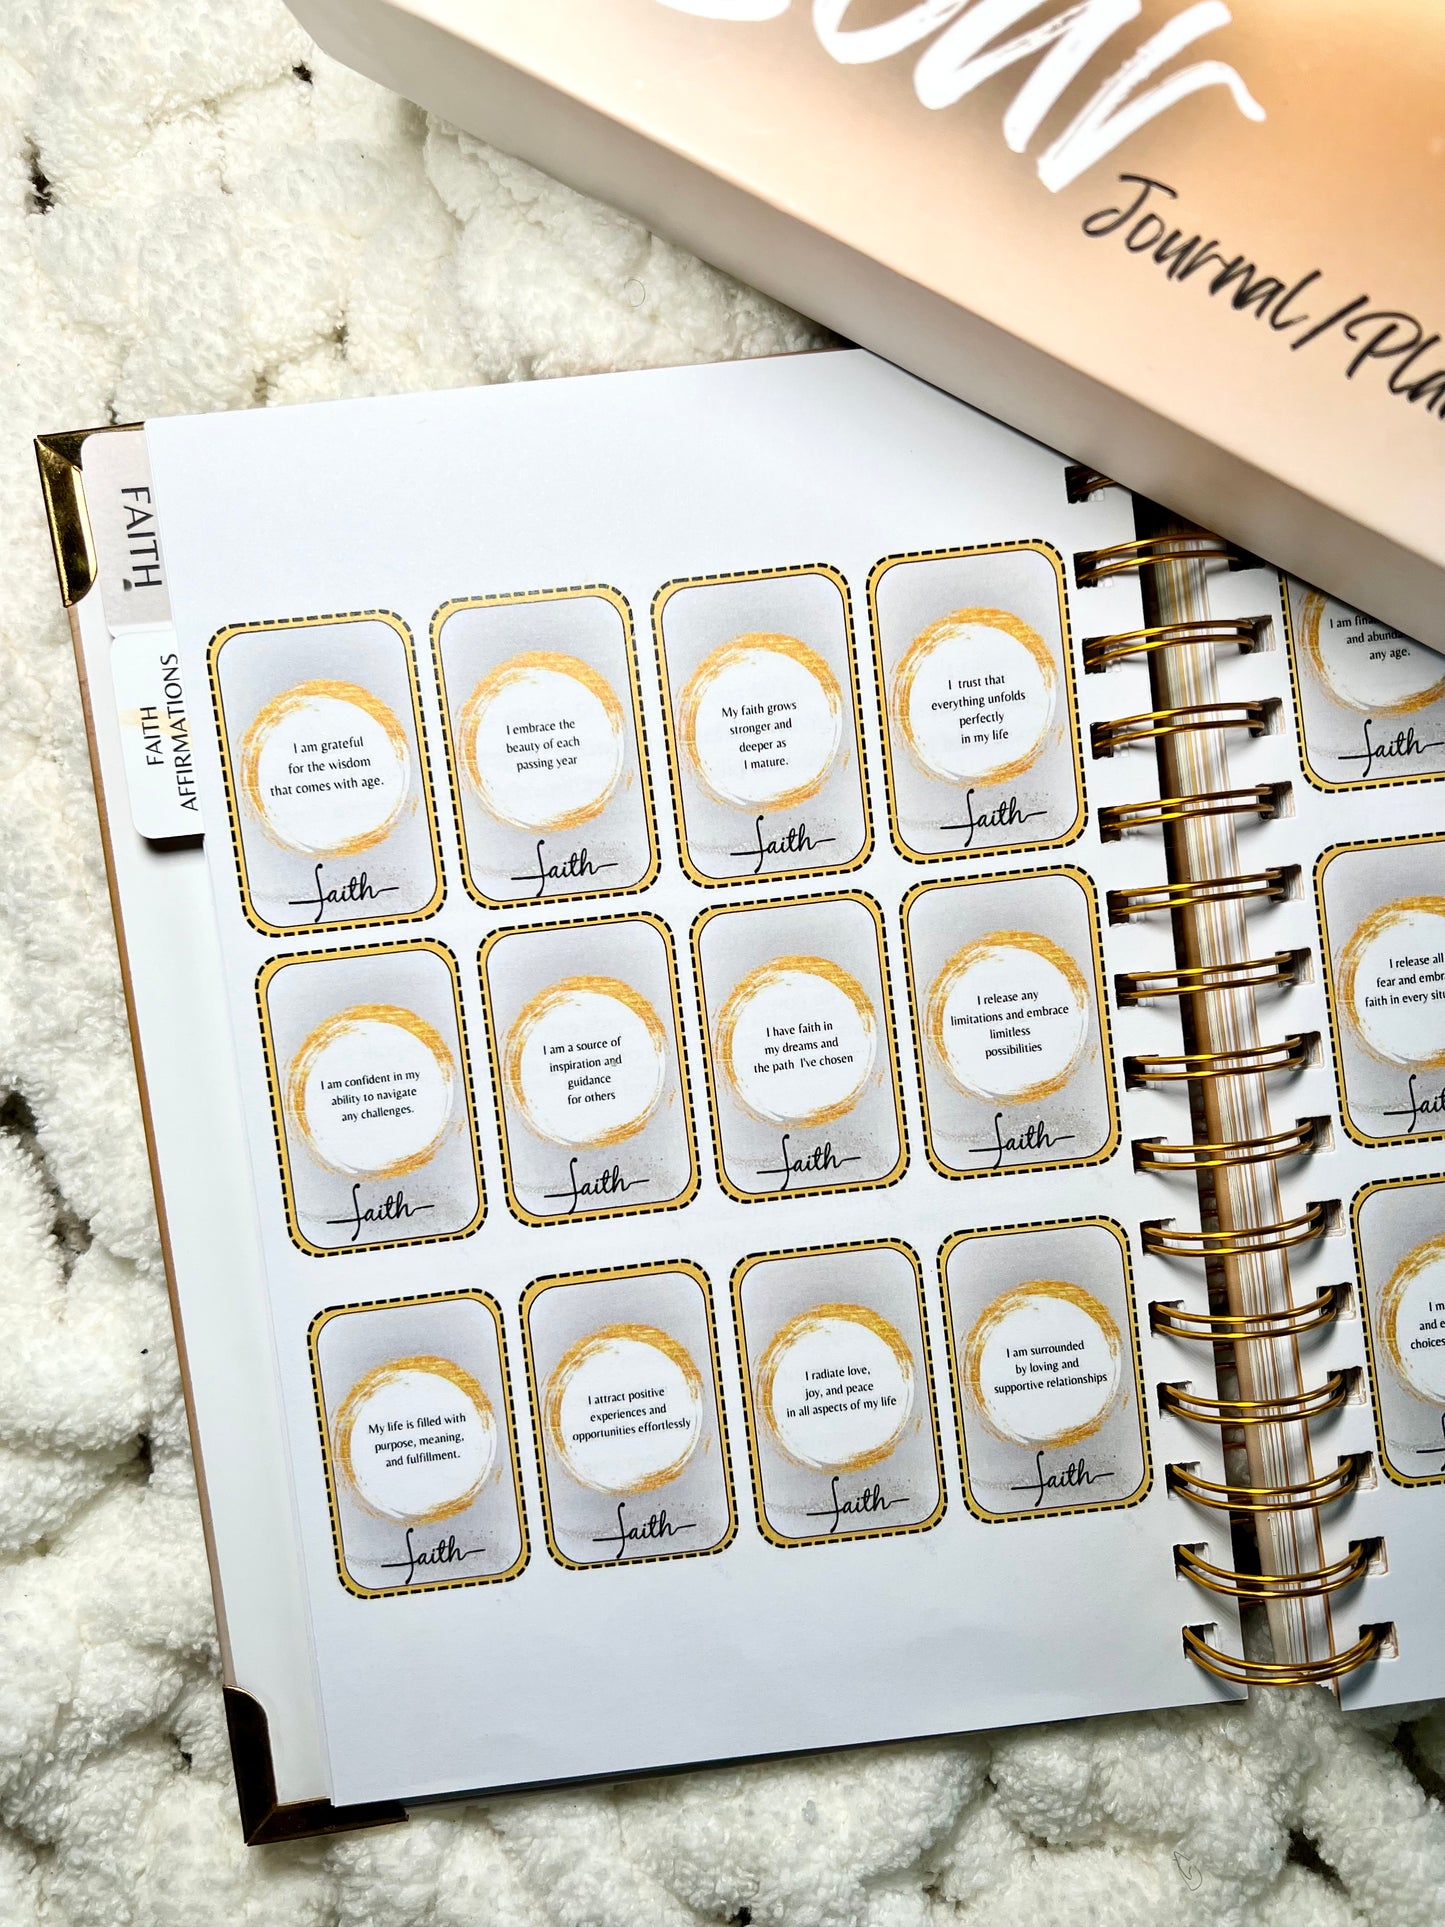 Arnita Champion's S.O.A.R Journal/Planner w/Magnetic Book Marker